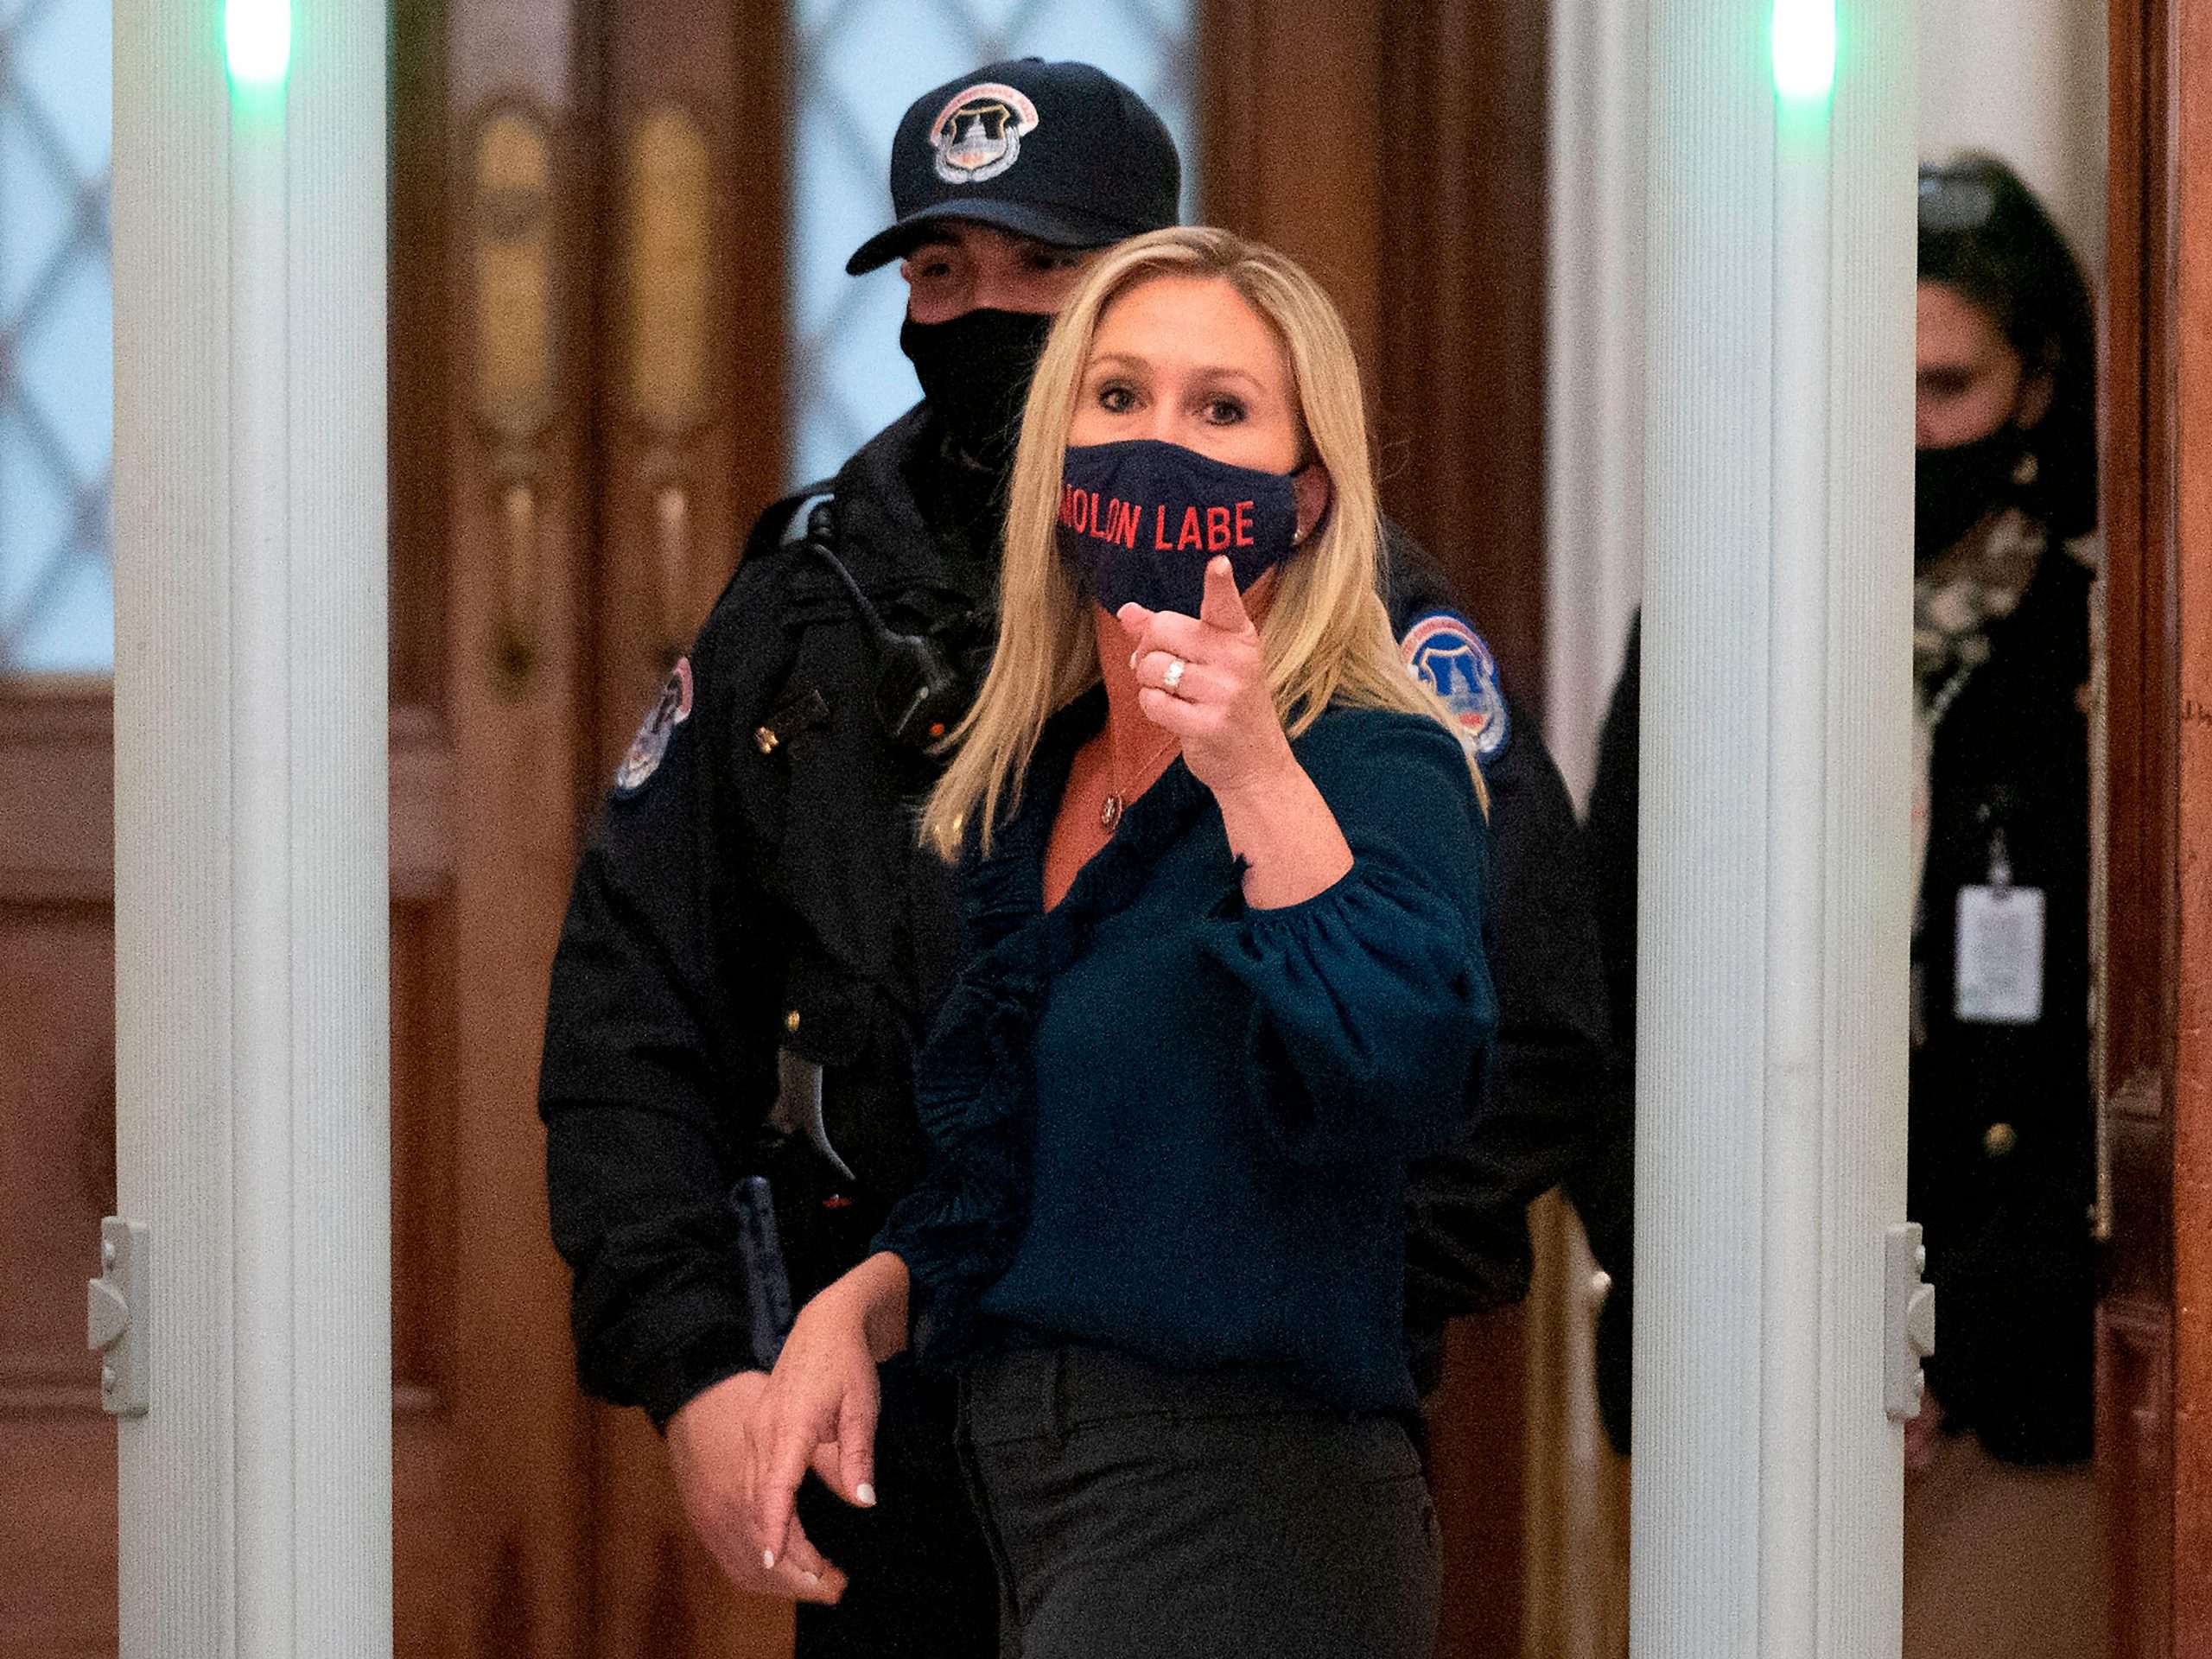 Republican Rep. Marjorie Taylor Greene of Georgia shouts at journalists as she goes through security outside the House Chamber at Capitol Hill on January 12, 2021.